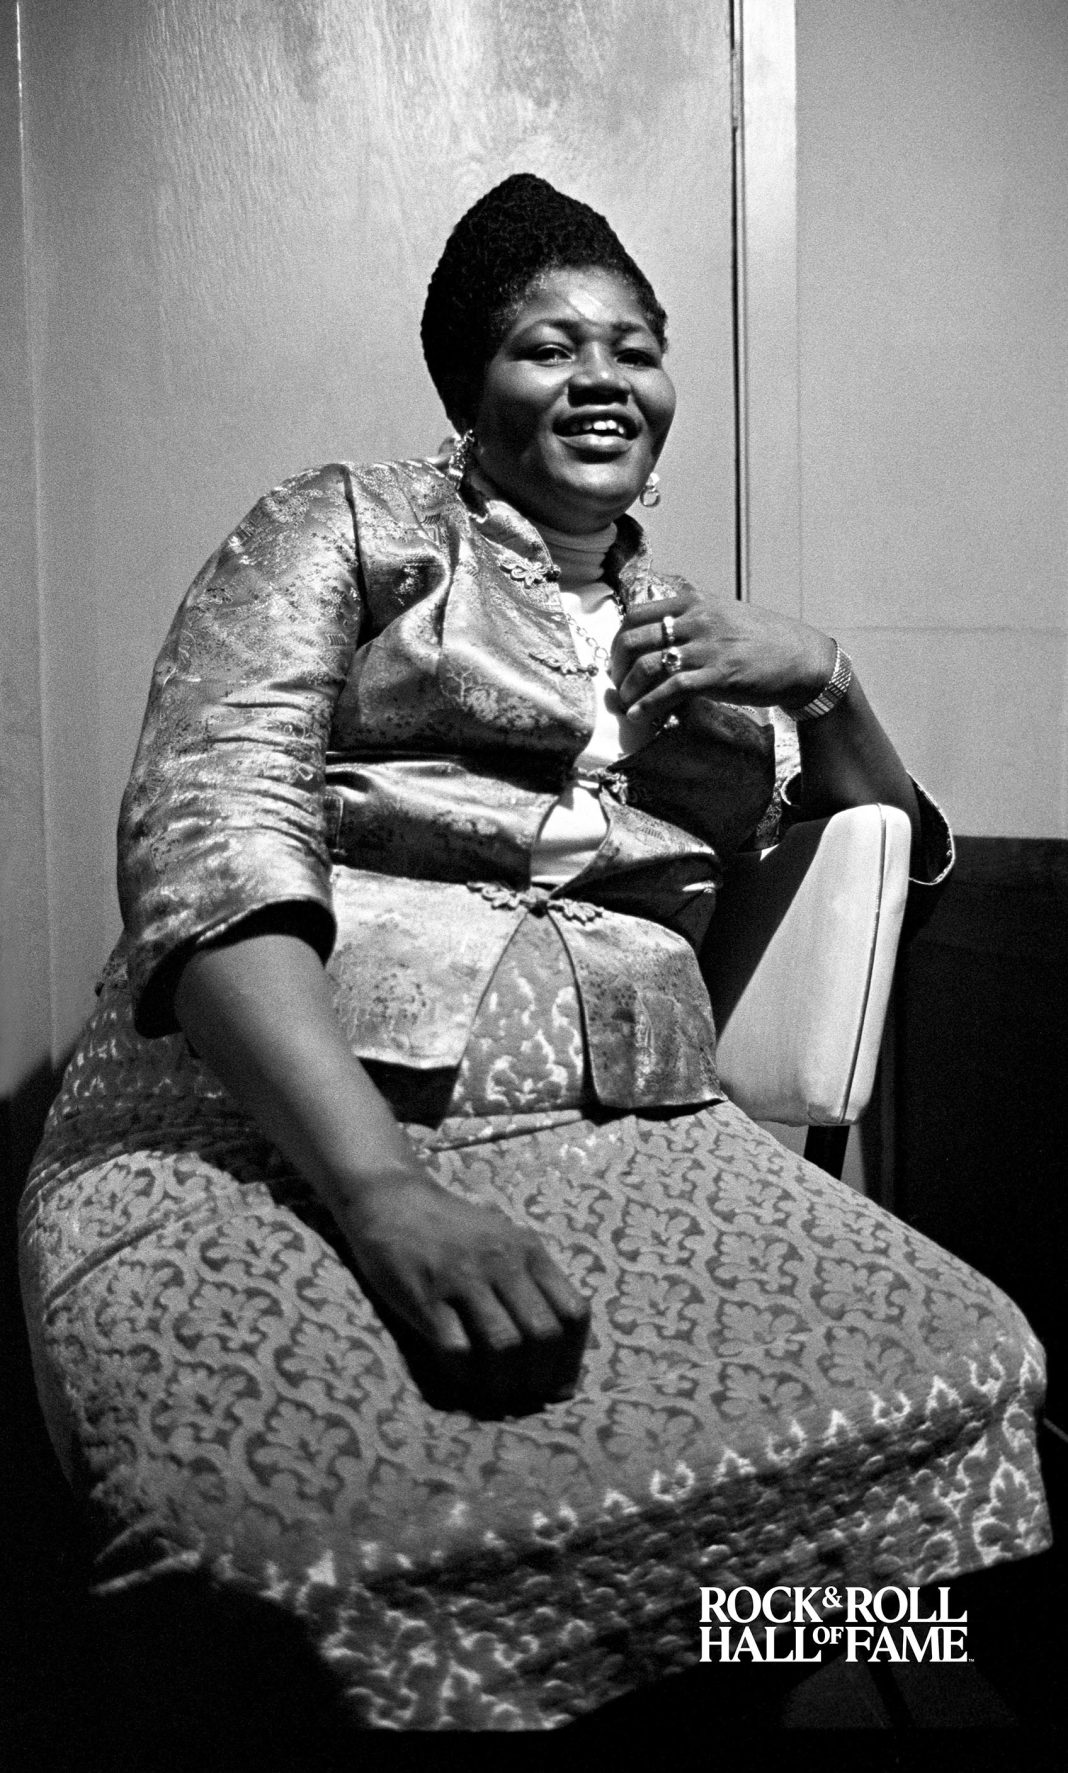 The Unsung Heroines of Rock and Roll: Big Mama Thornton and Sister Rosetta Tharpe